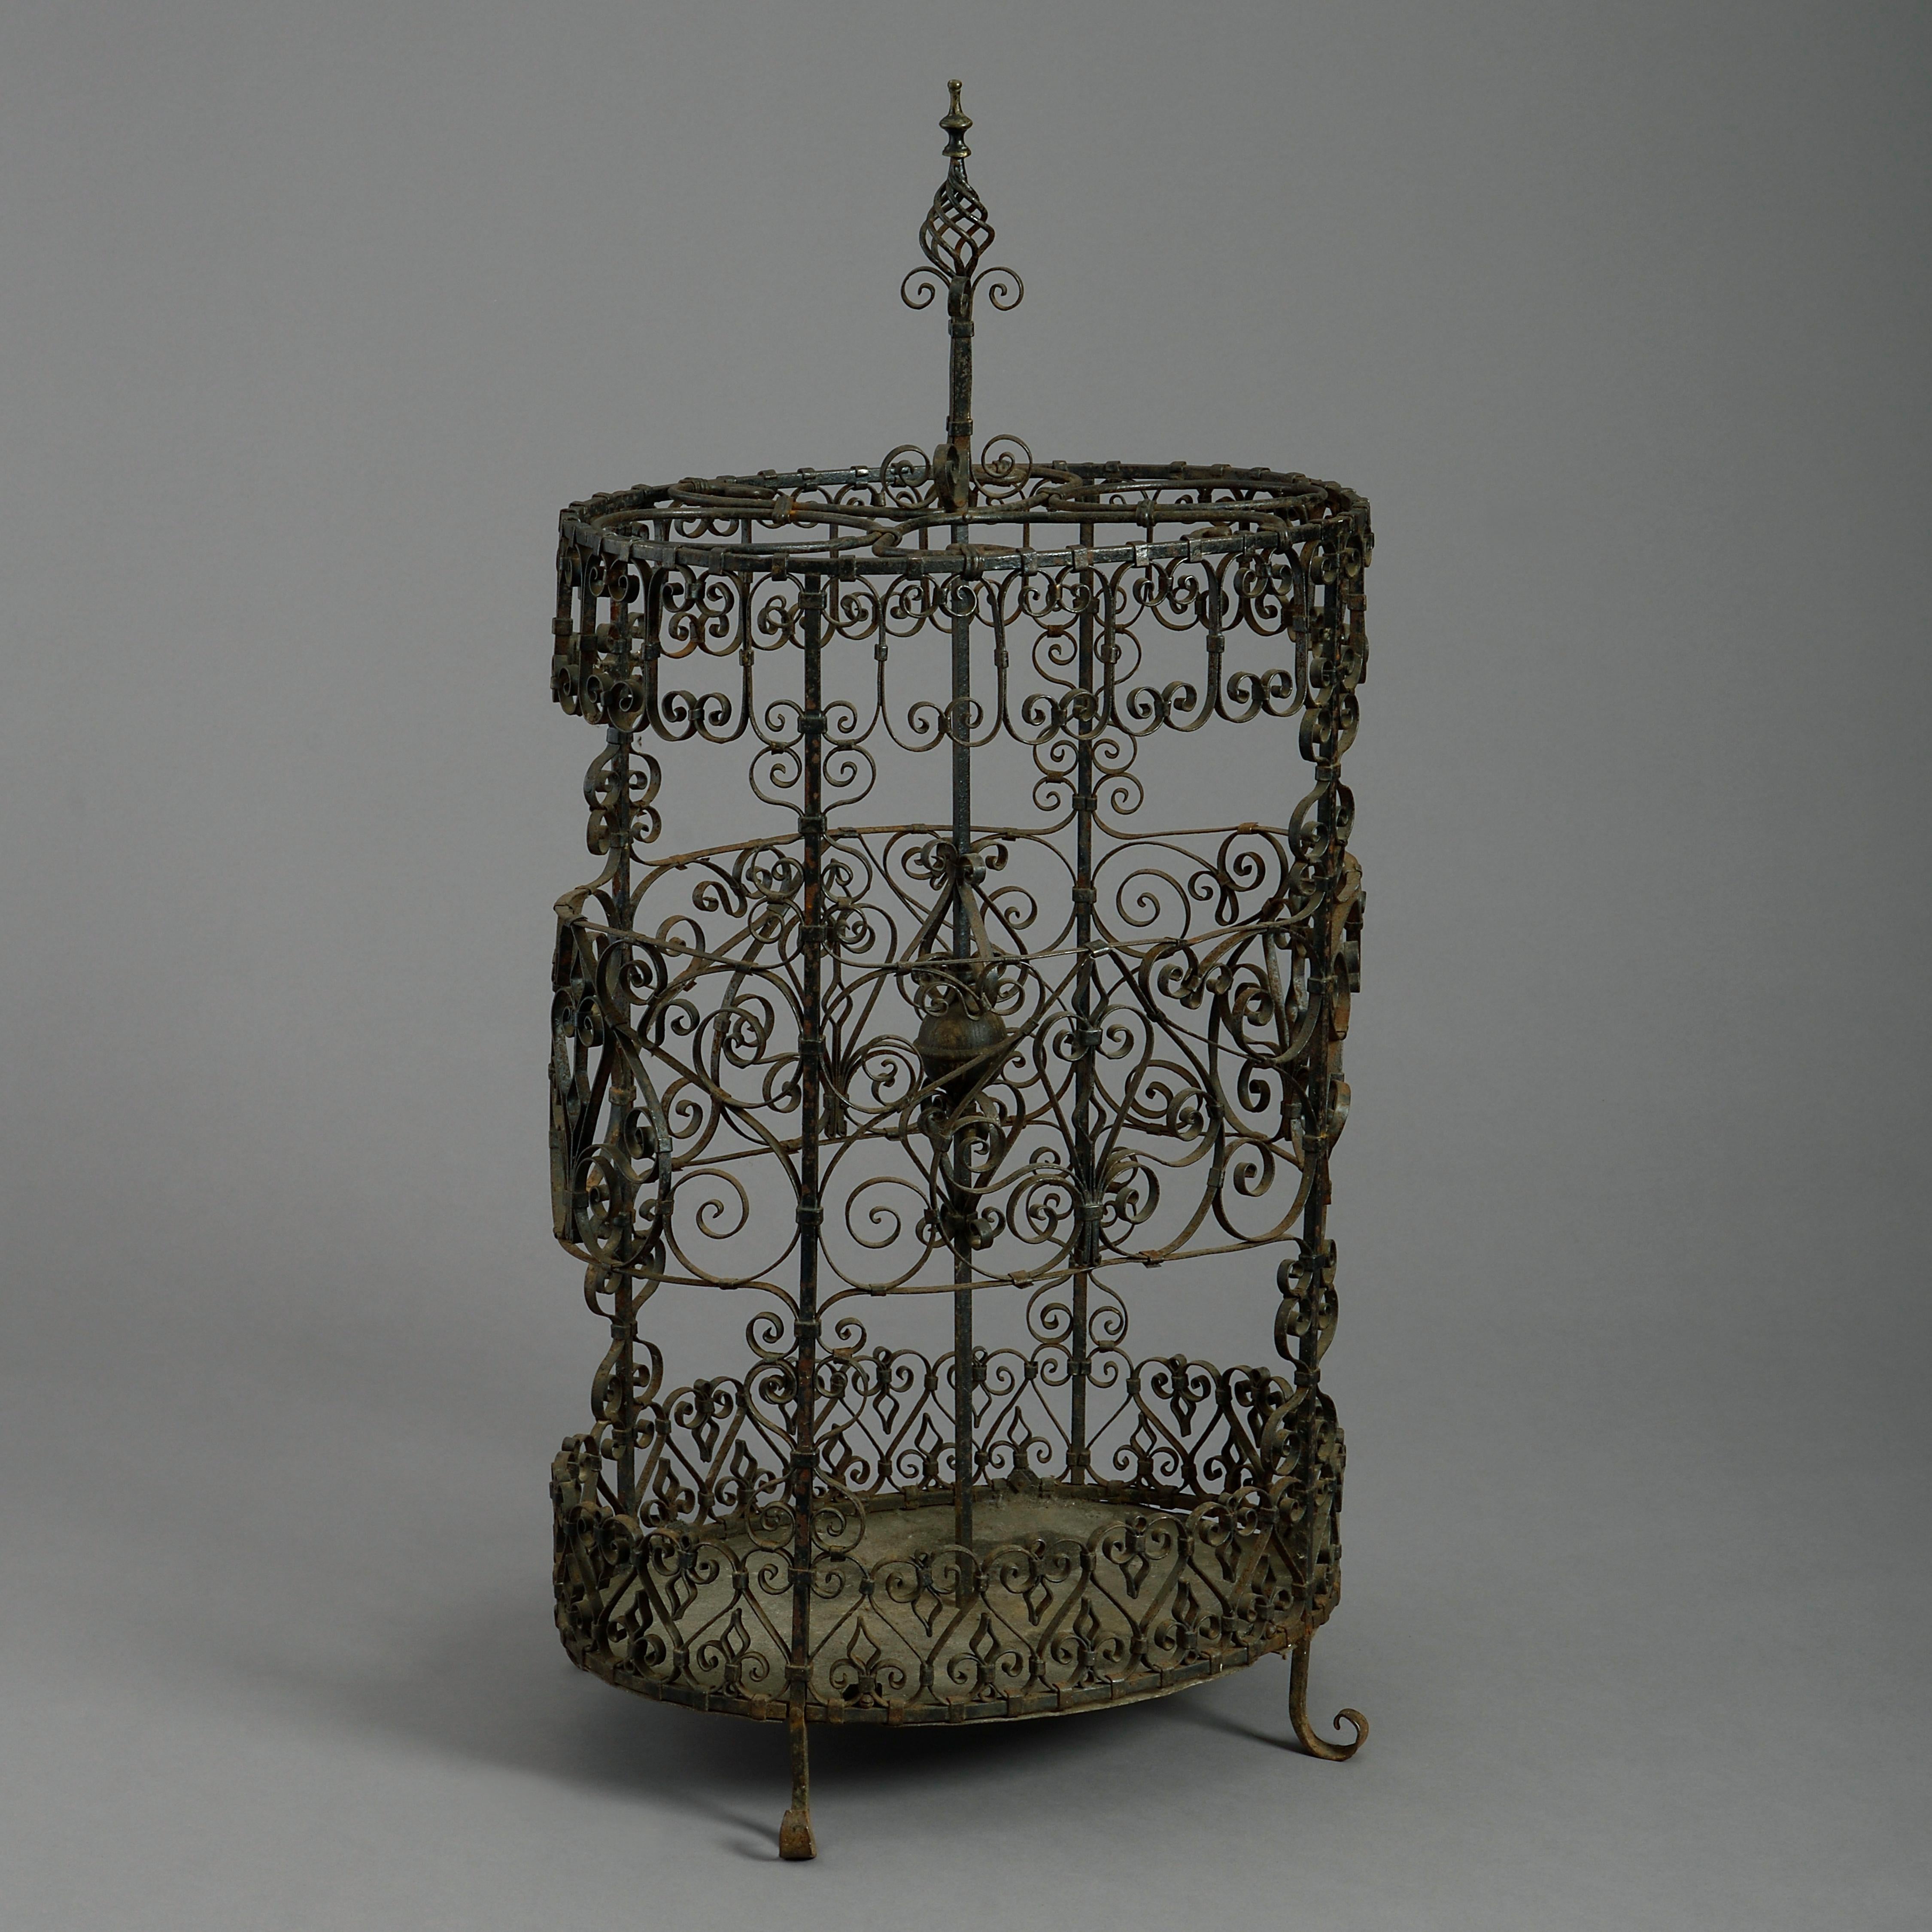 Baroque Revival 19th Century Wrought Iron Umbrella and Stick Stand